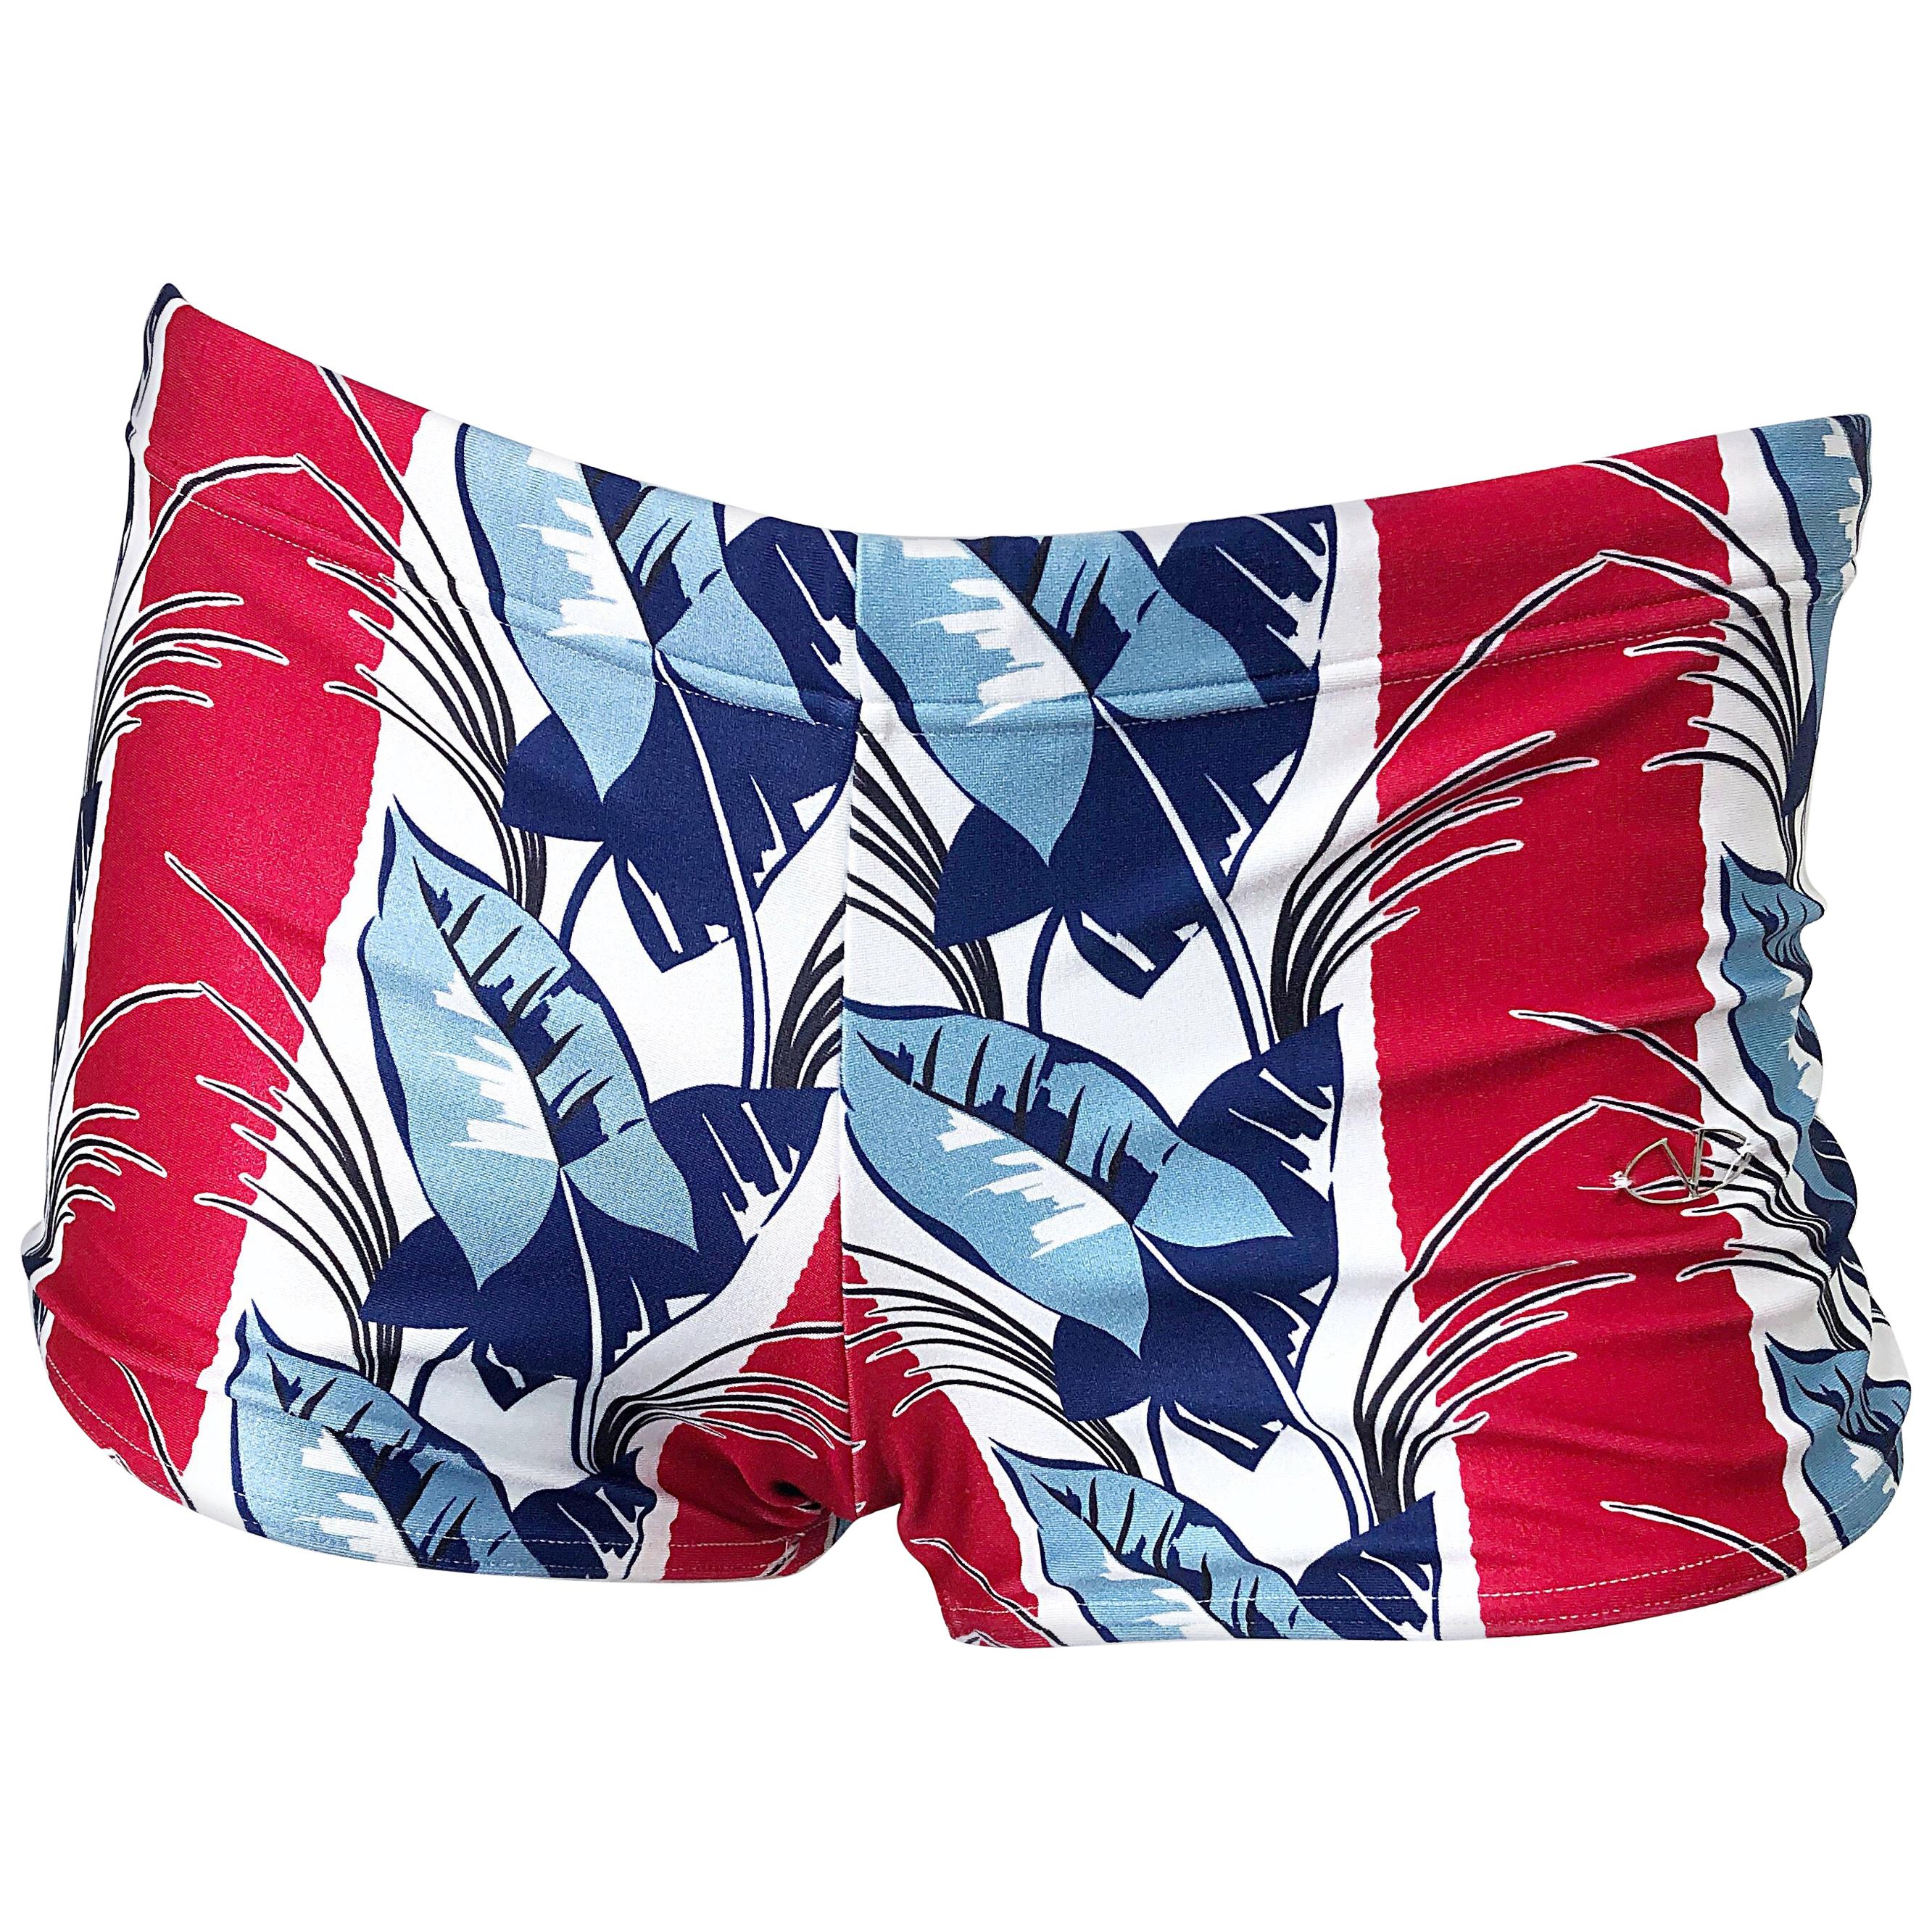 Valentino New 2000s Women's Red, White and Blue Boy Shorts Swimsuit Bottoms